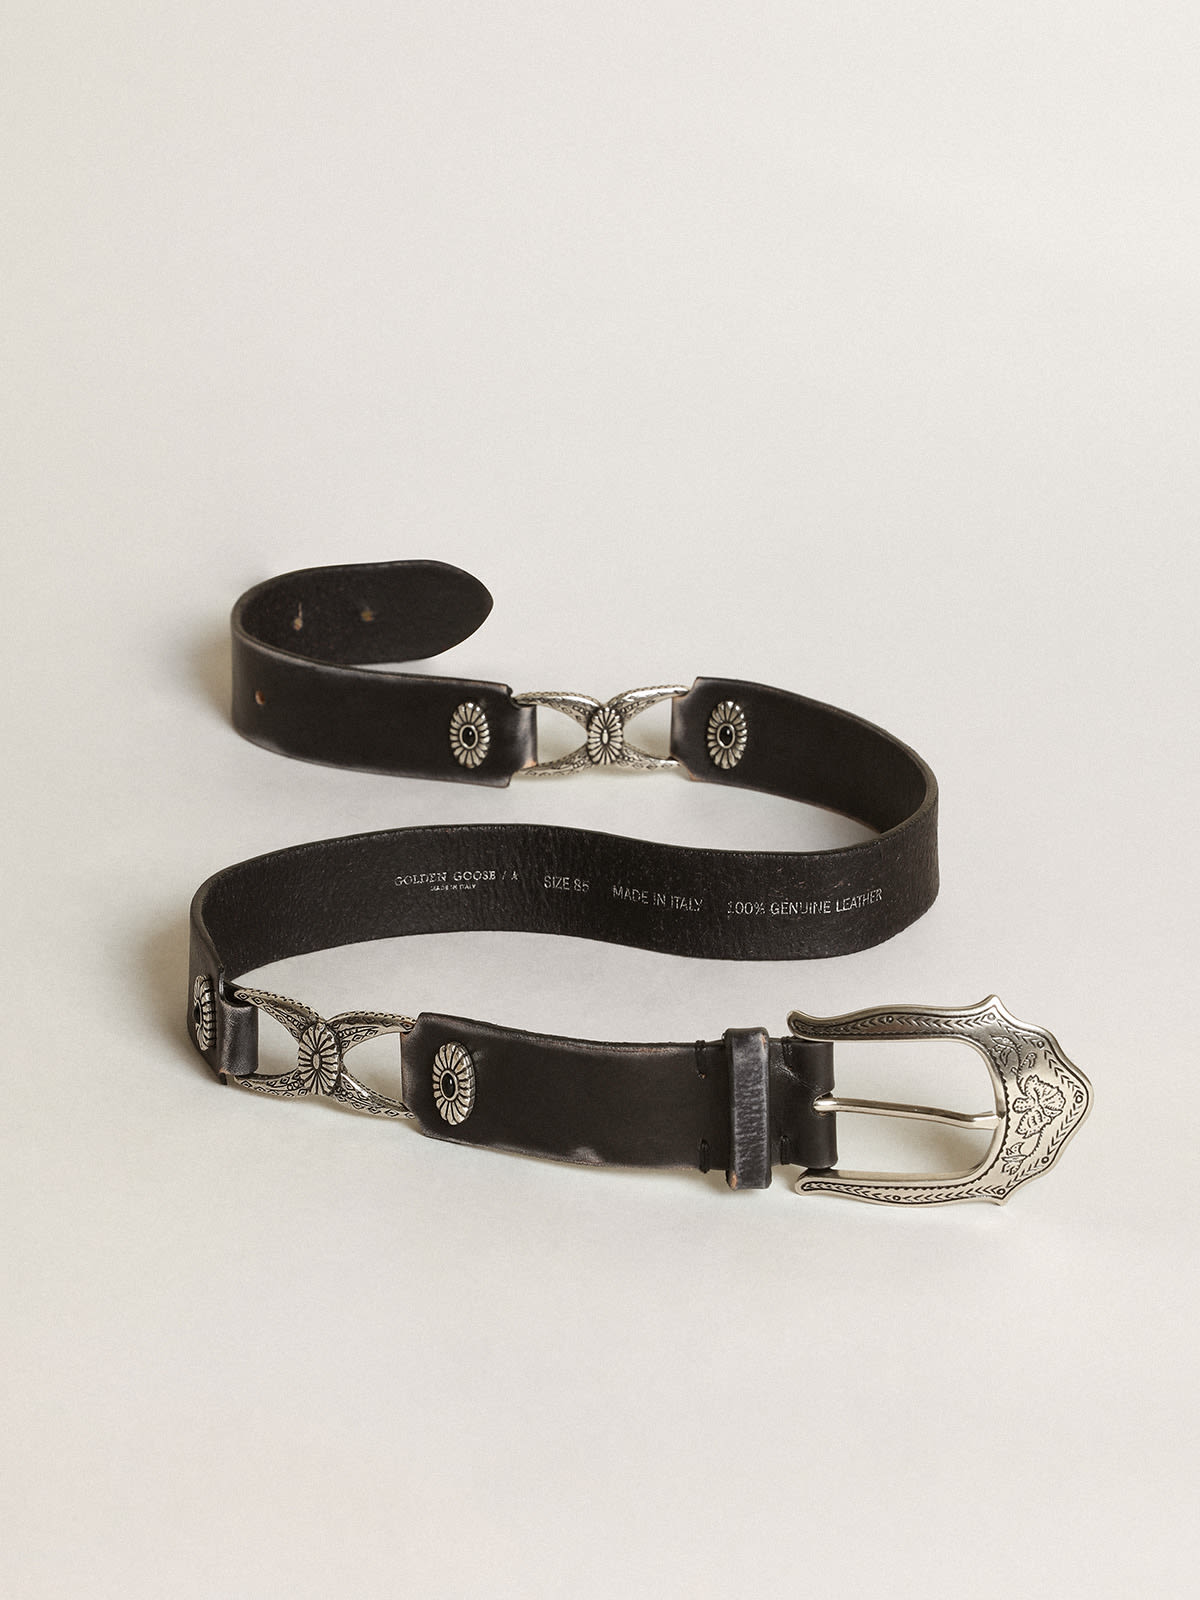 Golden Goose - Twins belt in black leather with vintage silver colored decorations in 